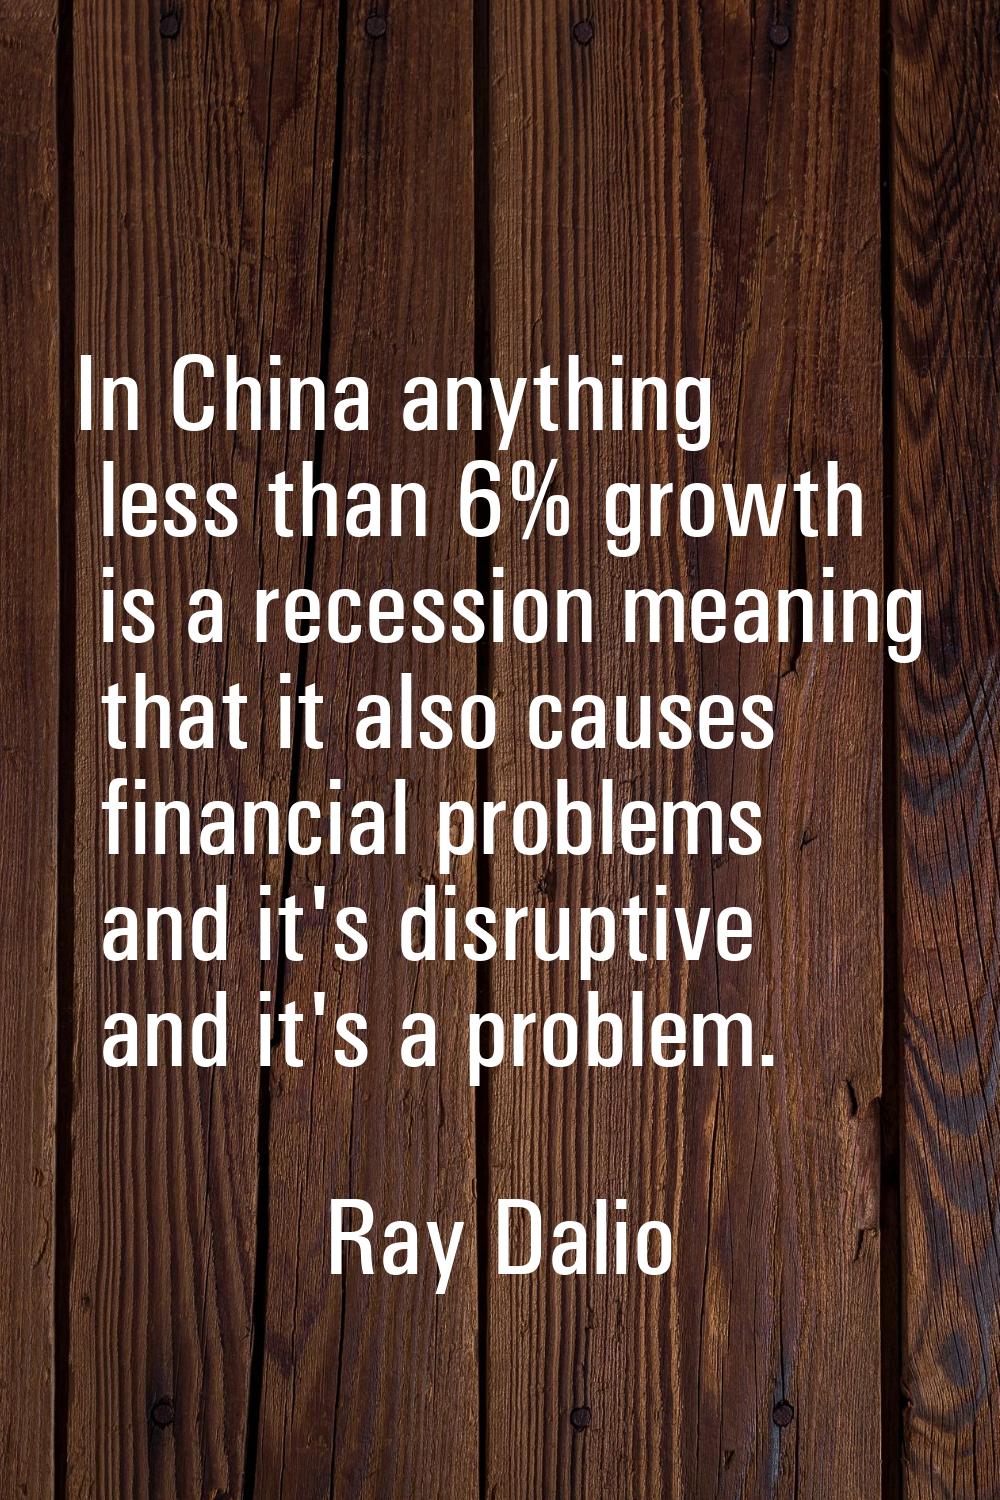 In China anything less than 6% growth is a recession meaning that it also causes financial problems